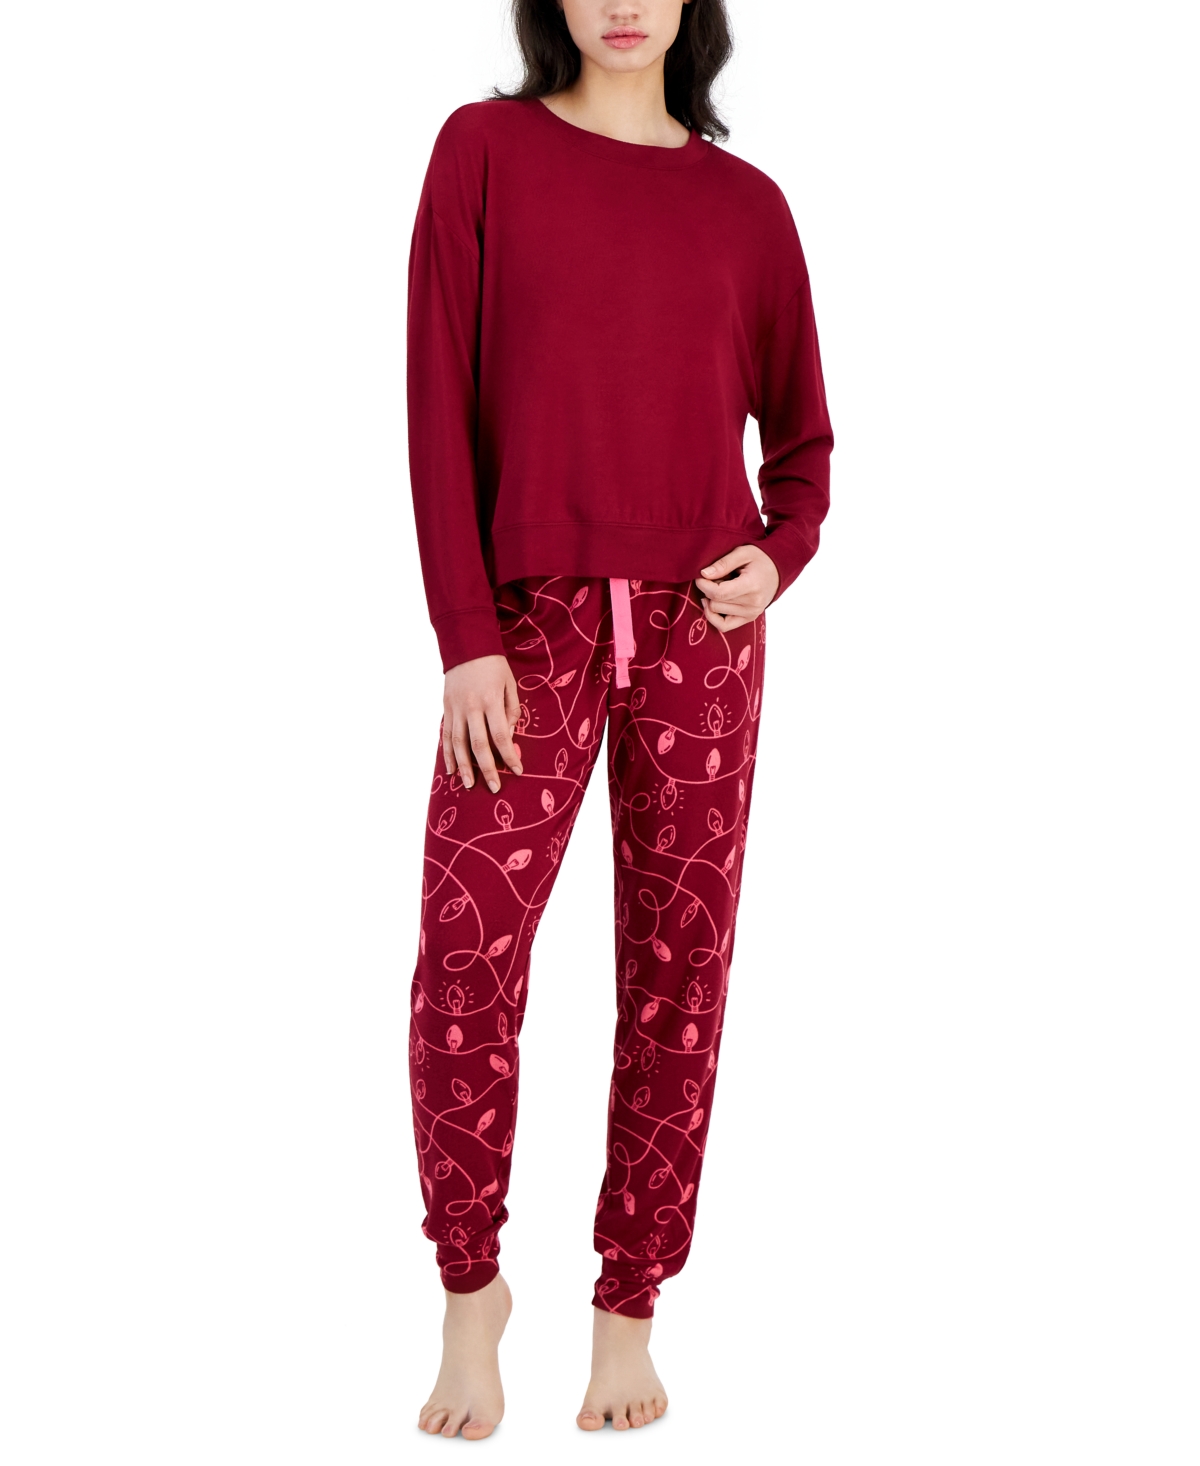 Jenni Women's 2-pc. Long-sleeve Packaged Pajamas Set, Created For Macy's In Xmas Light Smpl